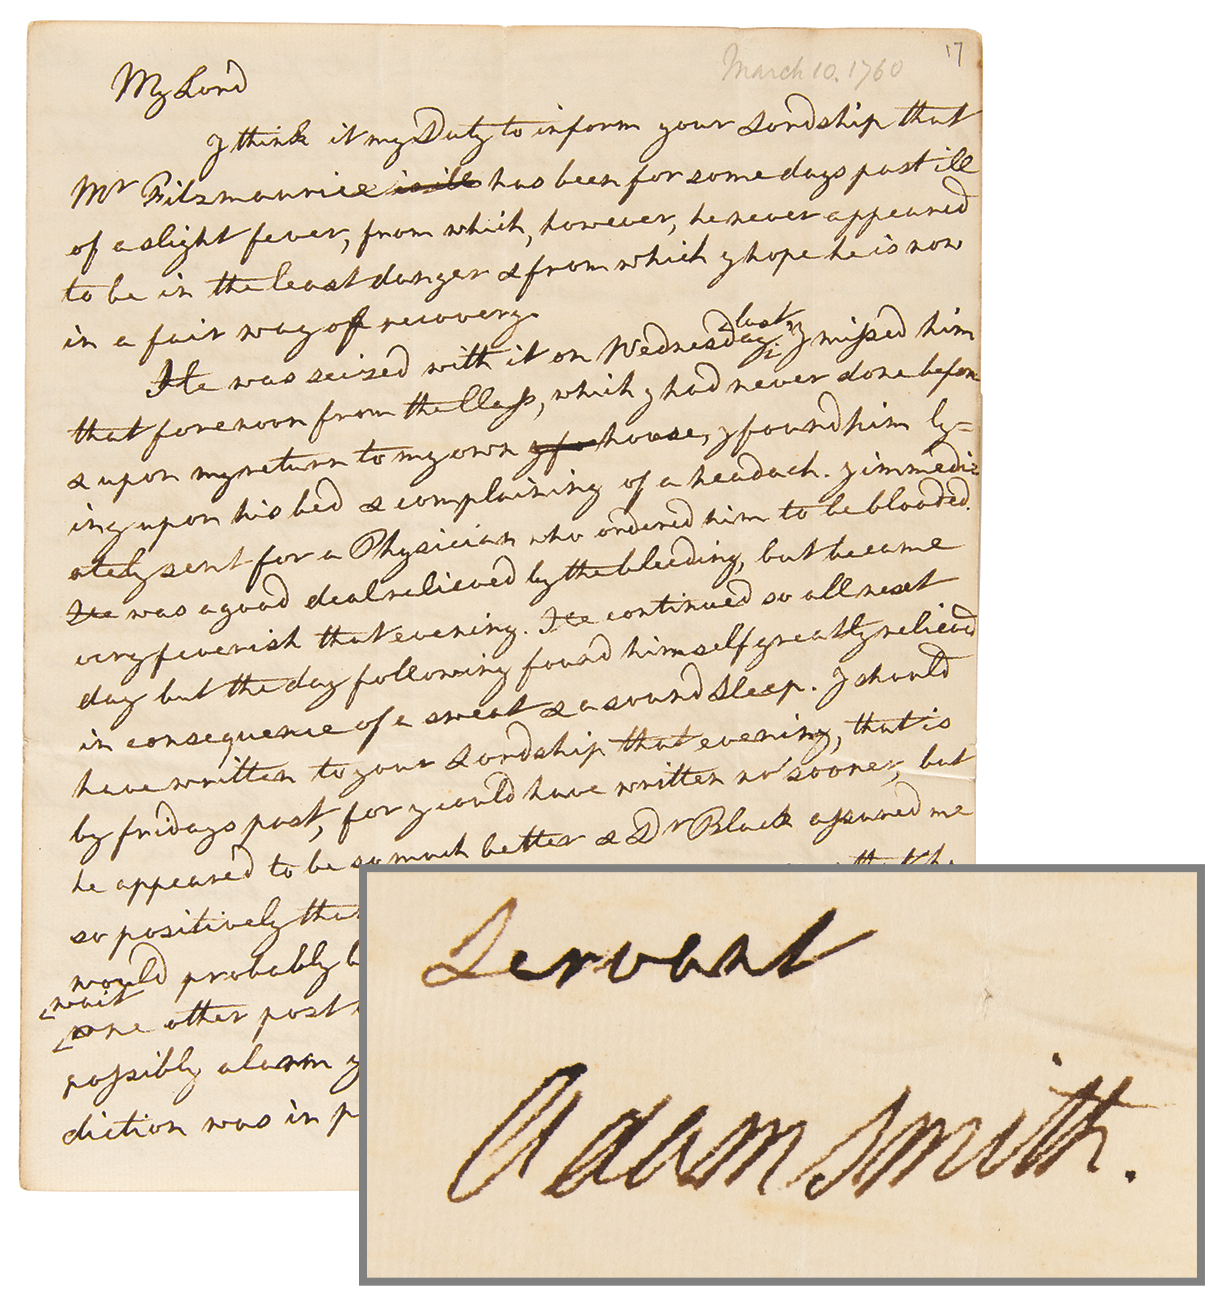 Lot #157 Adam Smith Autograph Letter Signed on a Student's Sickness - One Year After Publishing The Theory of Moral Sentiments